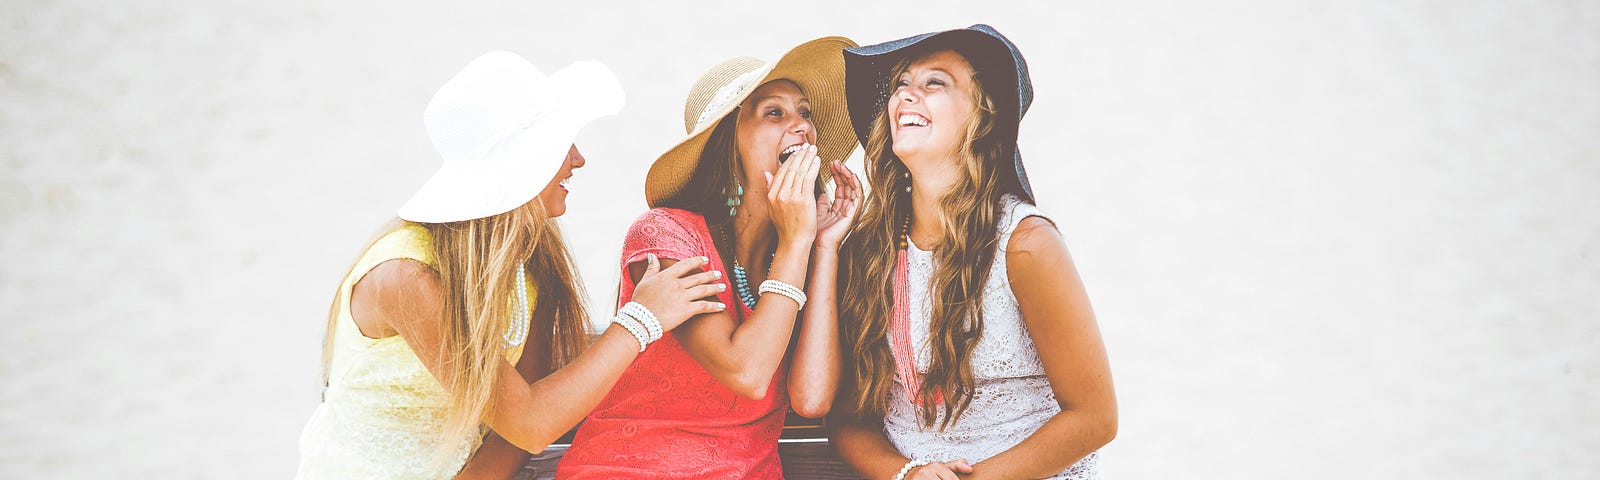 Three woman in sunhats leaning in and appearing to be gossiping about something